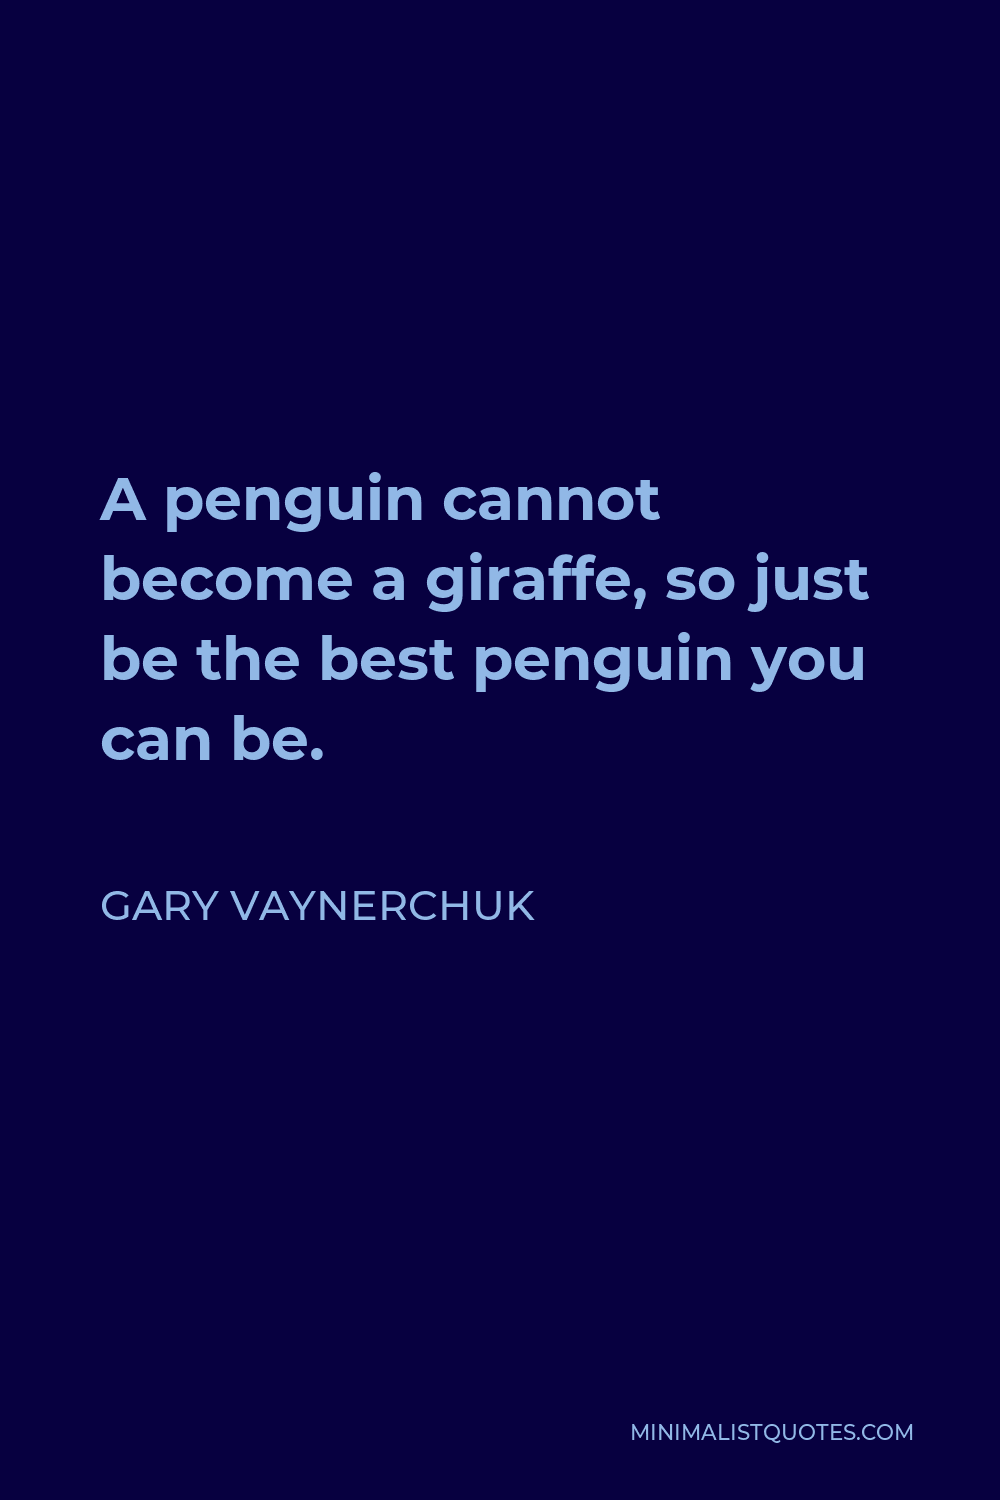 Gary Vaynerchuk Quote - A penguin cannot become a giraffe, so just be the best penguin you can be.